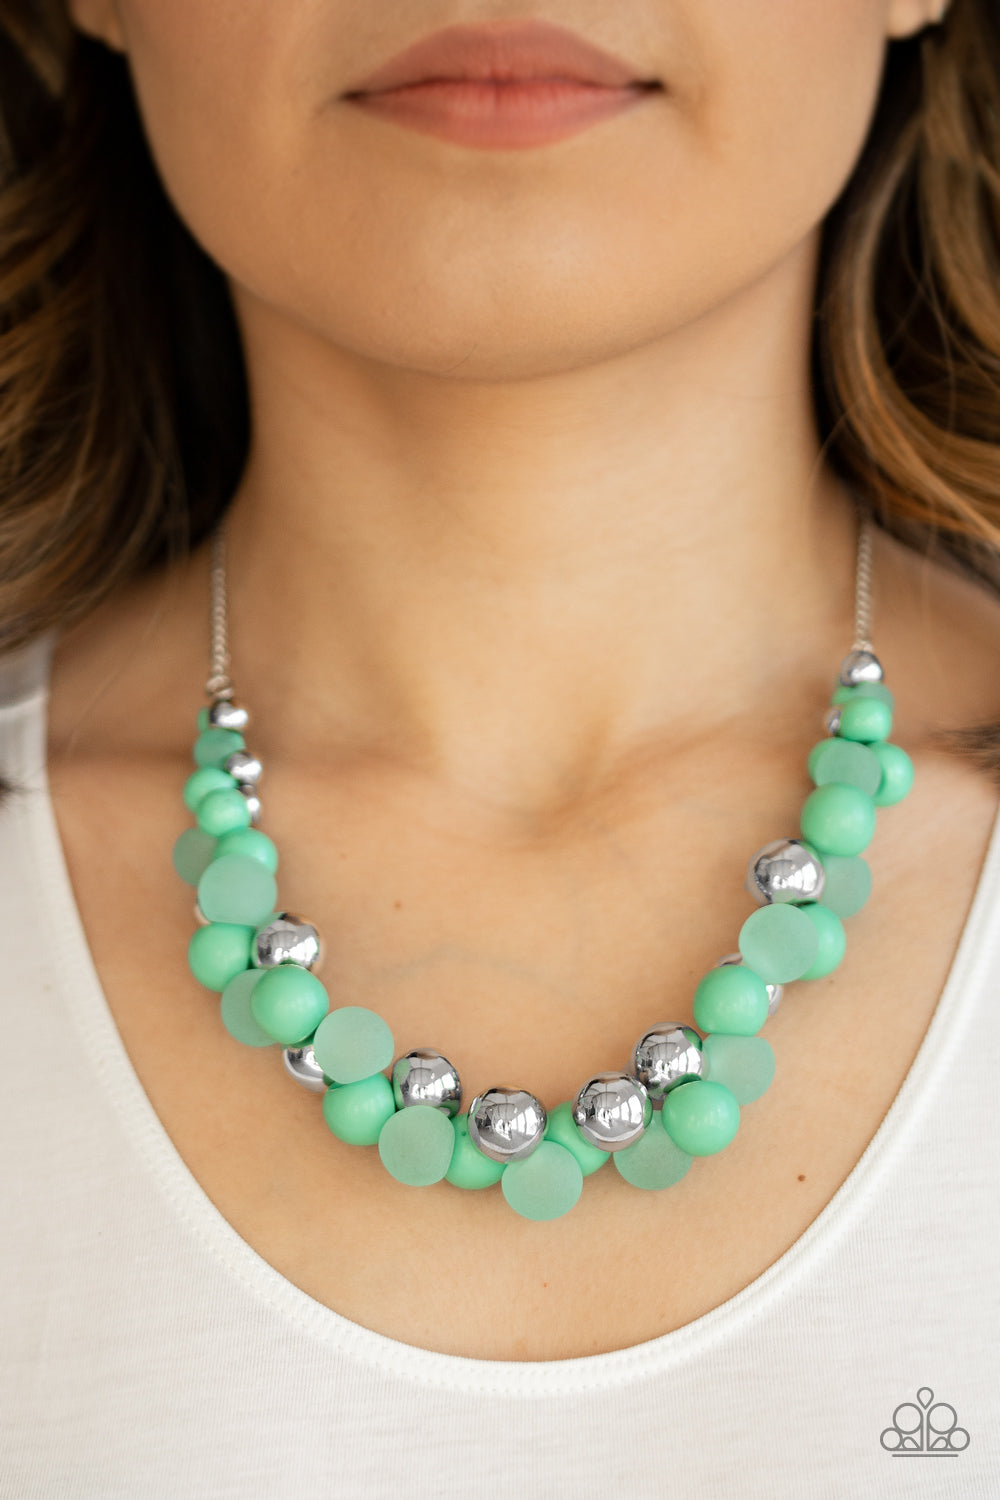 Bubbly Brilliance - Green, Silver, and Cloudy Bead Necklace - Paparazzi Accessories